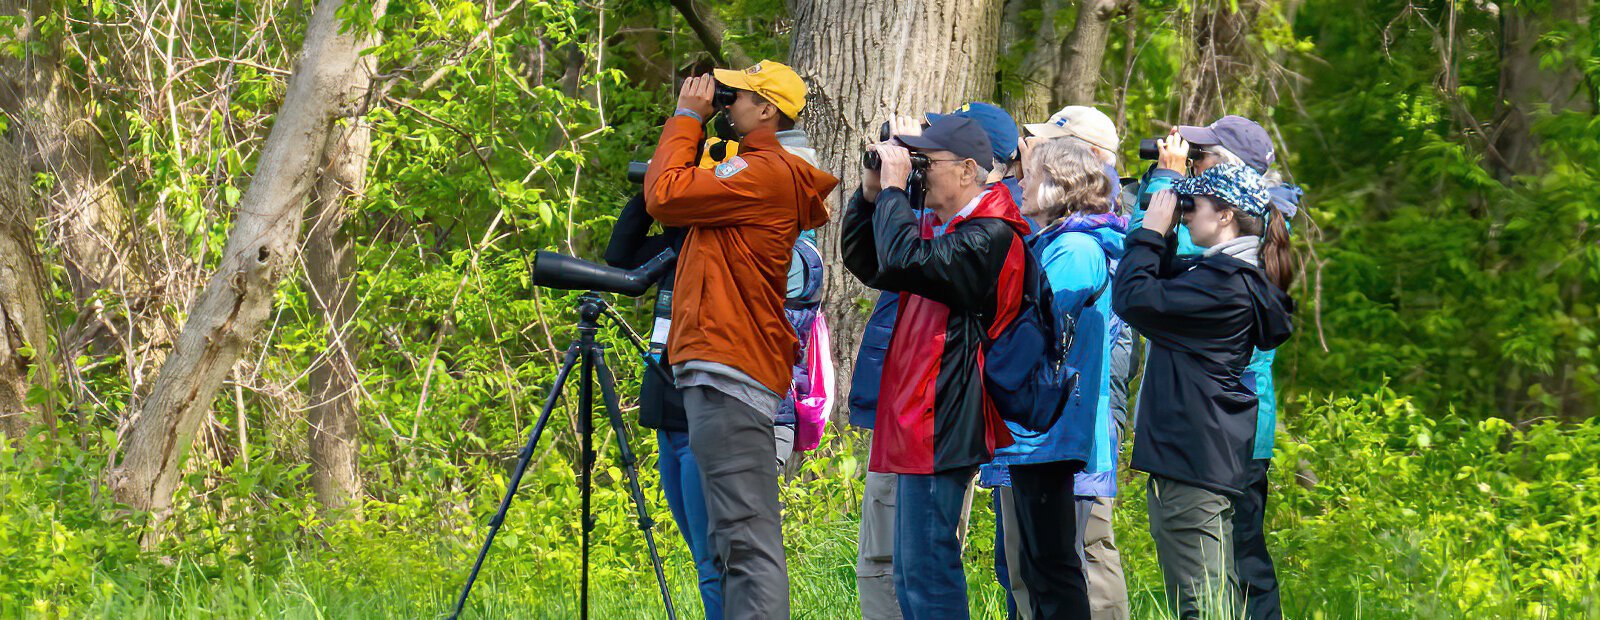 They’re back. It’s that time of year and if you’re very quiet, sometimes you can find groups of birders in some of the area parks.